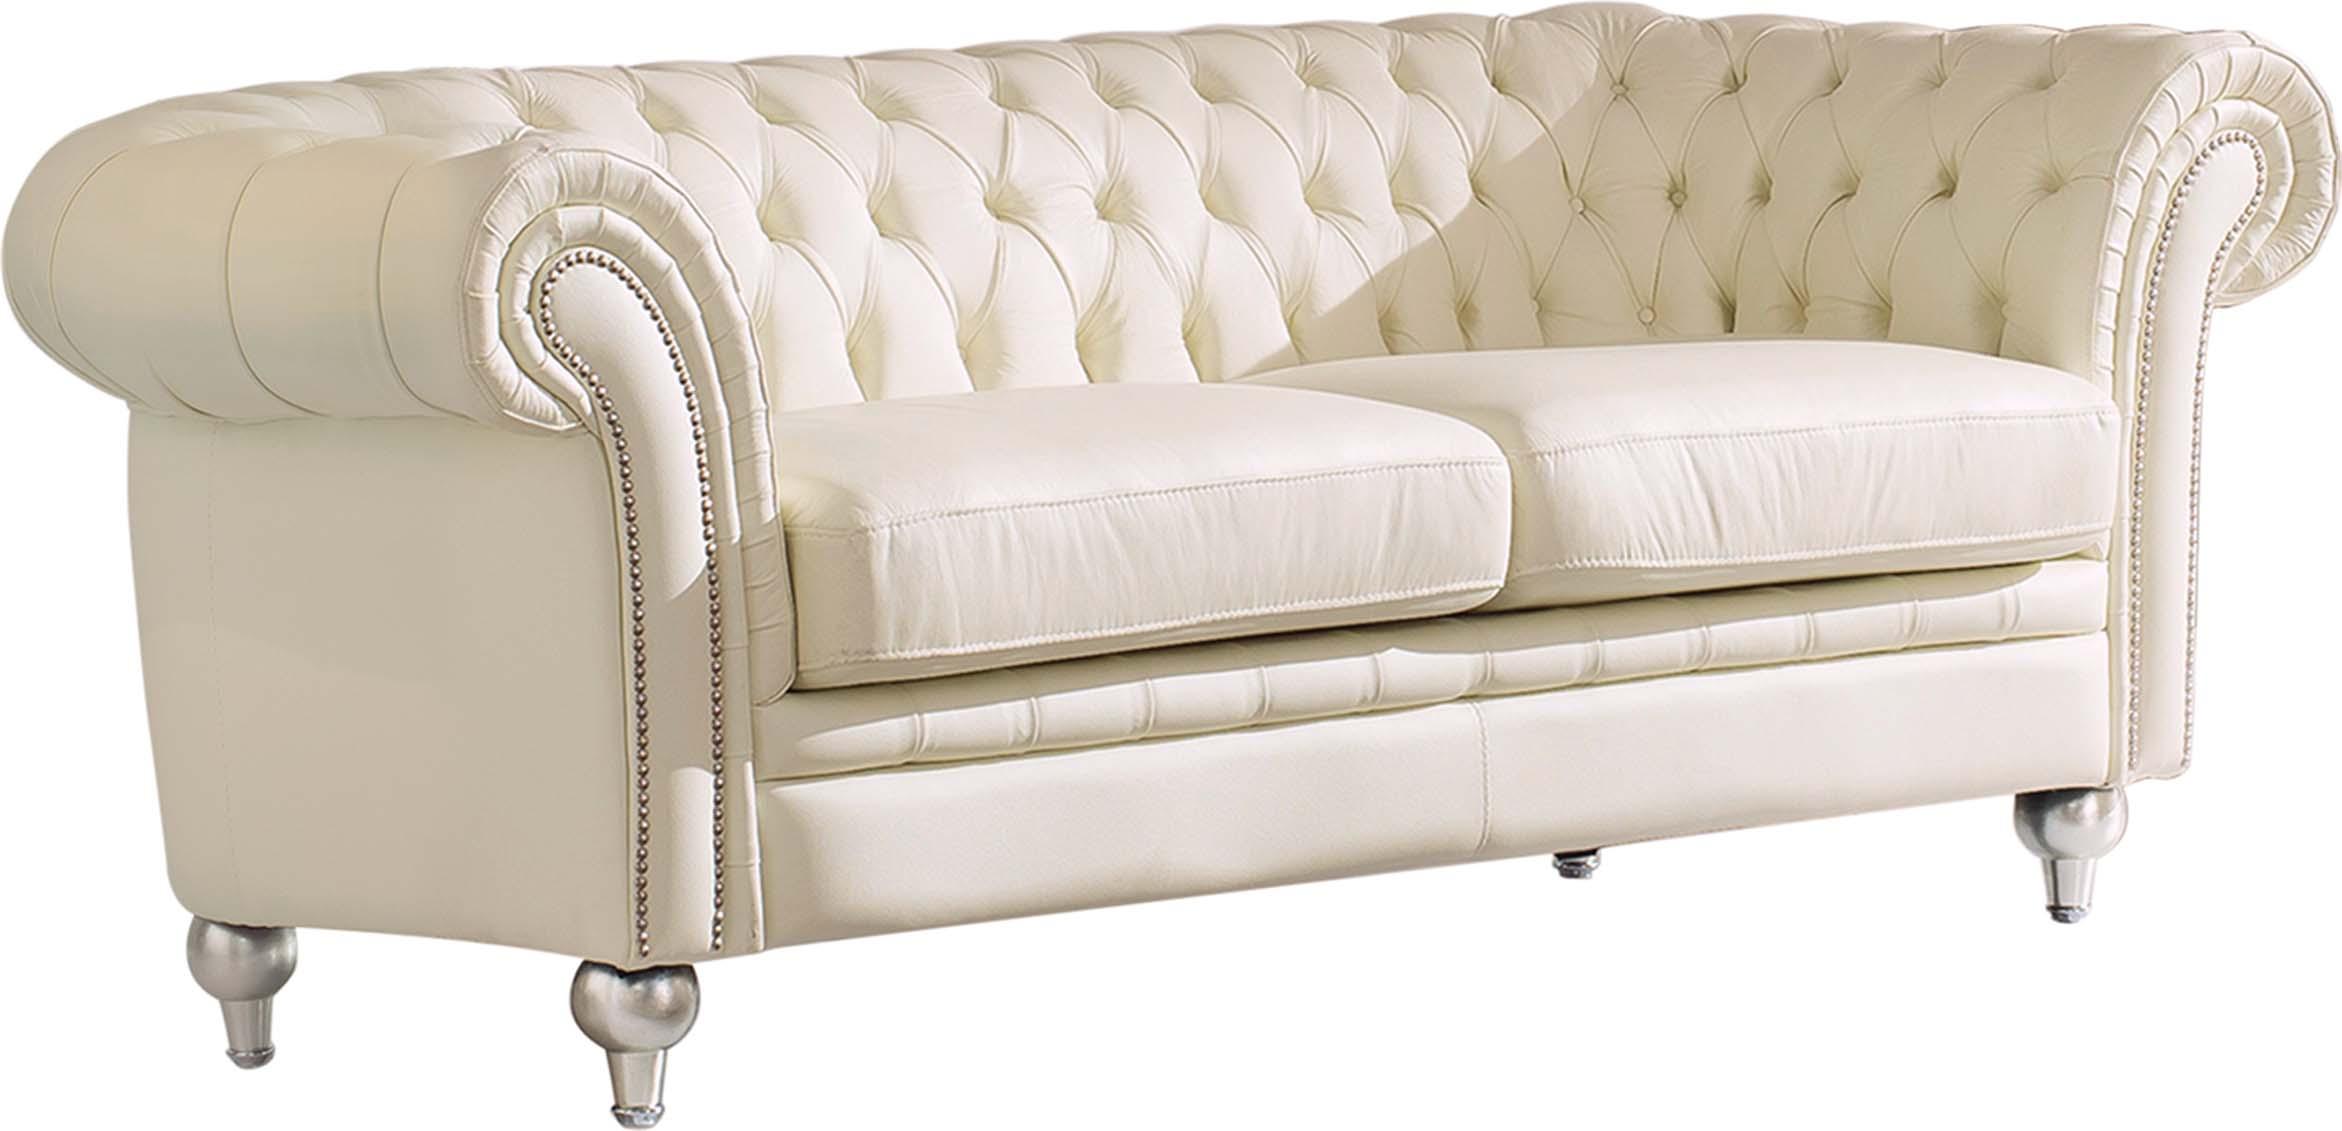 Contemporary Sofa LH2044-IV-S LH2044-IV-Sofa in Ivory Genuine Leather